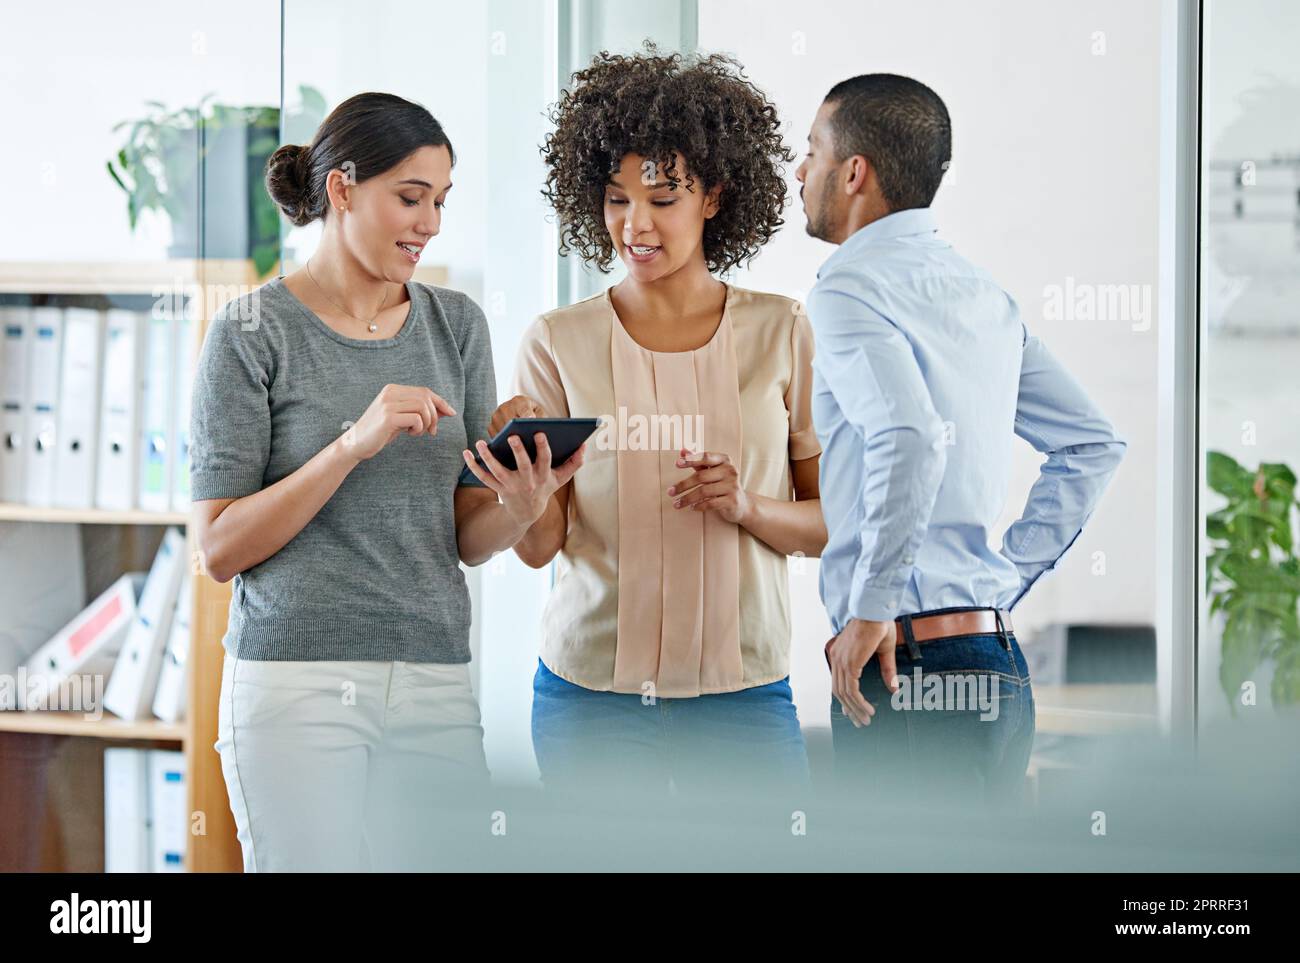 Teamwork makes the dream work. office colleagues having a discussion over a digital tablet. Stock Photo